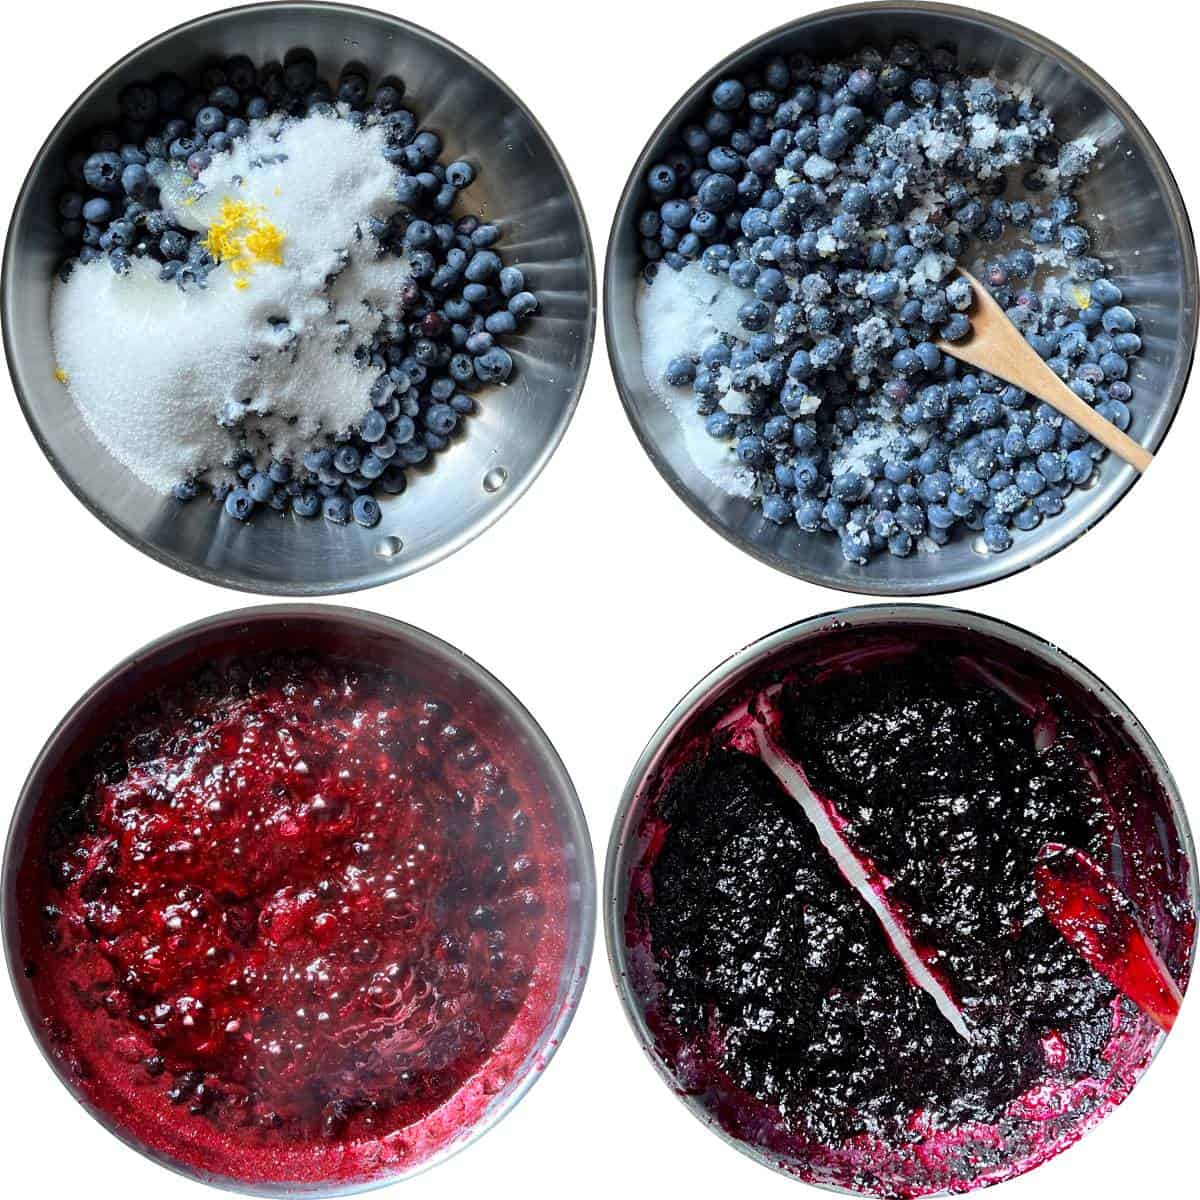 A photo collage of blueberry jam being cooked.